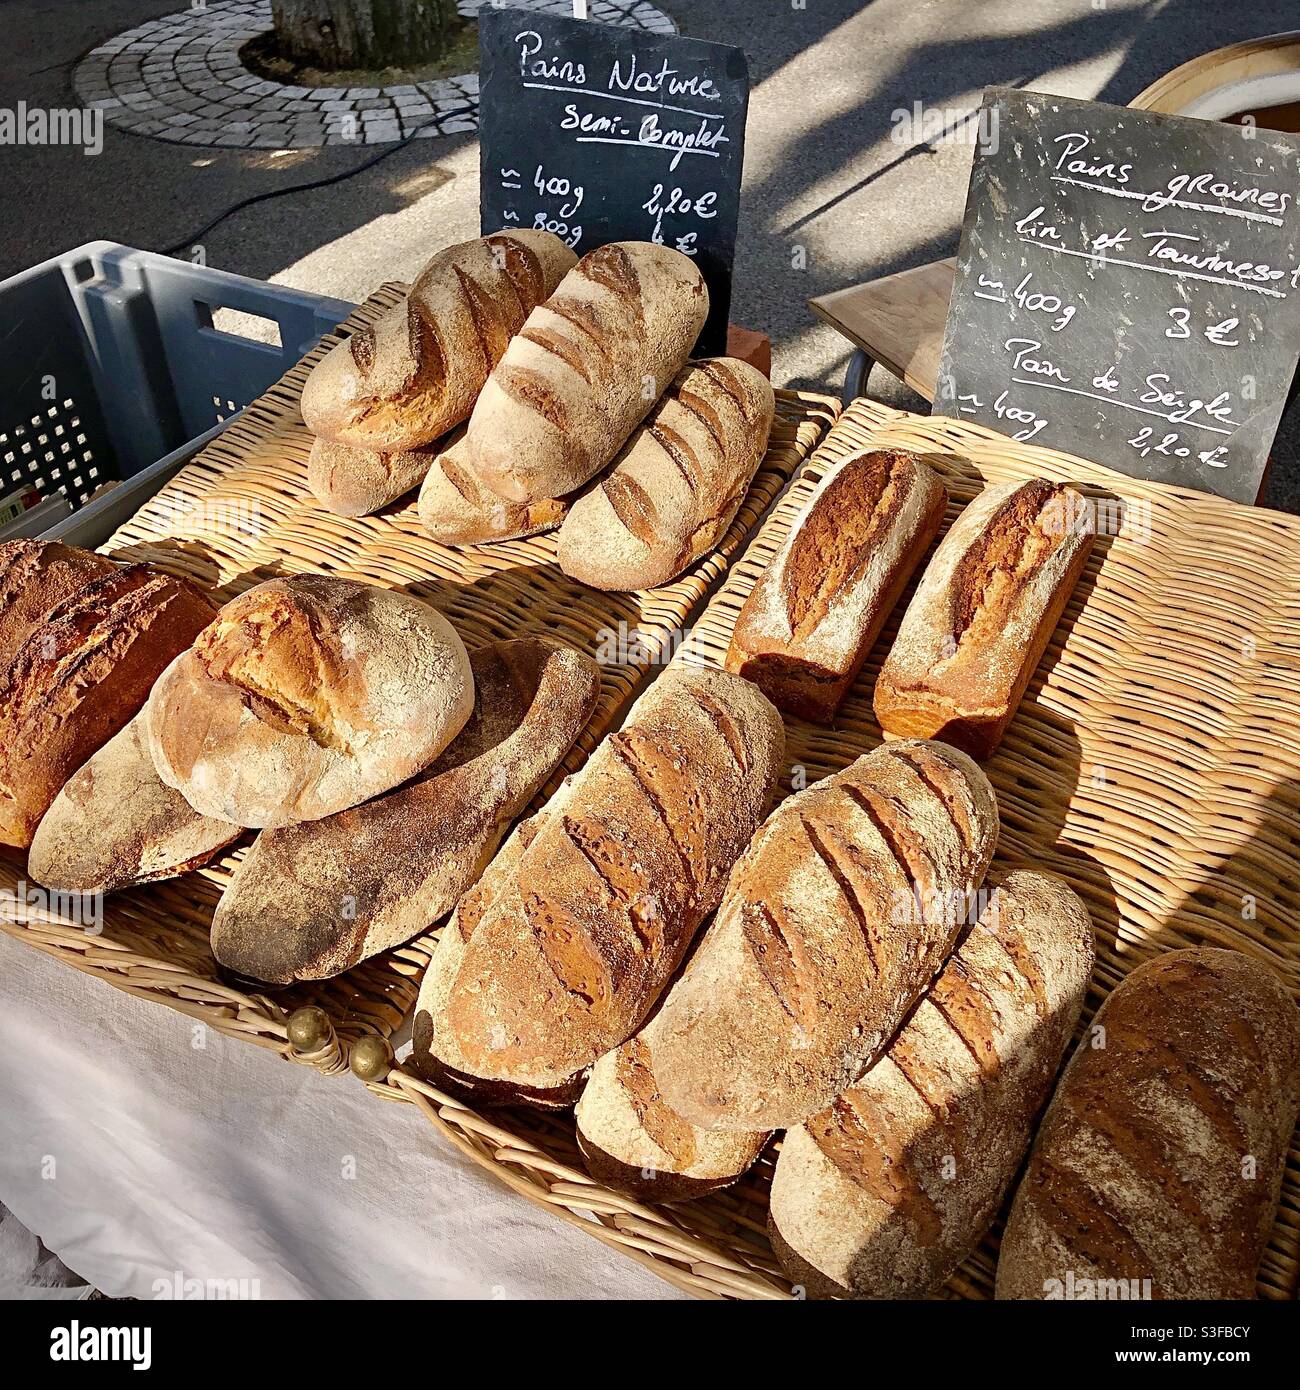 Hand made breads on local market stall - France. Stock Photo